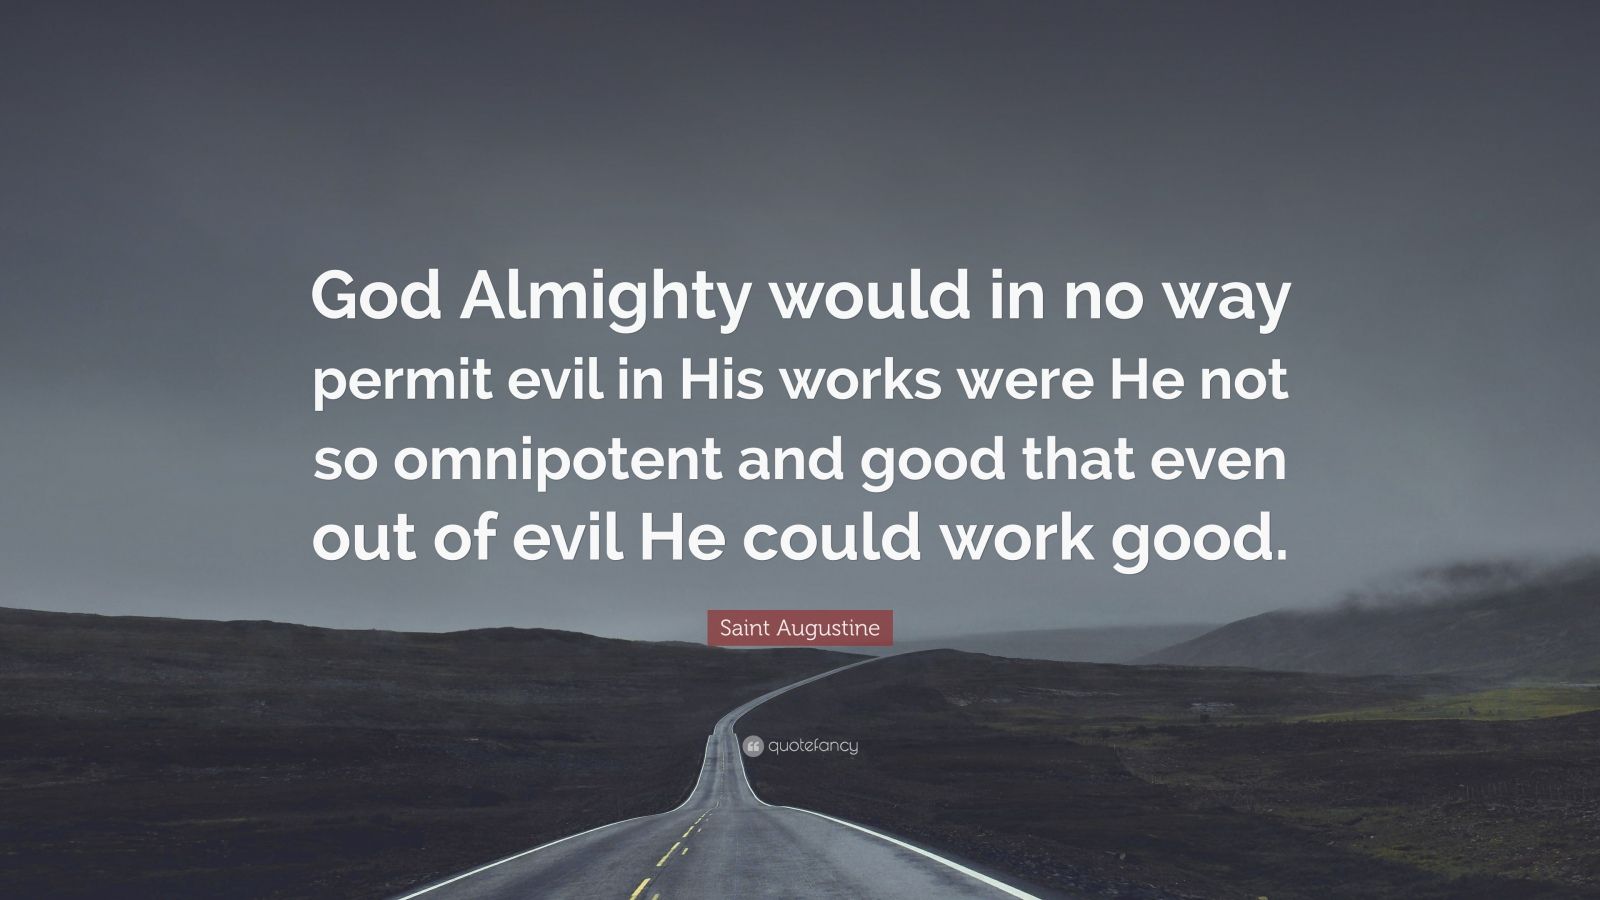 Saint Augustine Quote: “God Almighty would in no way permit evil in His